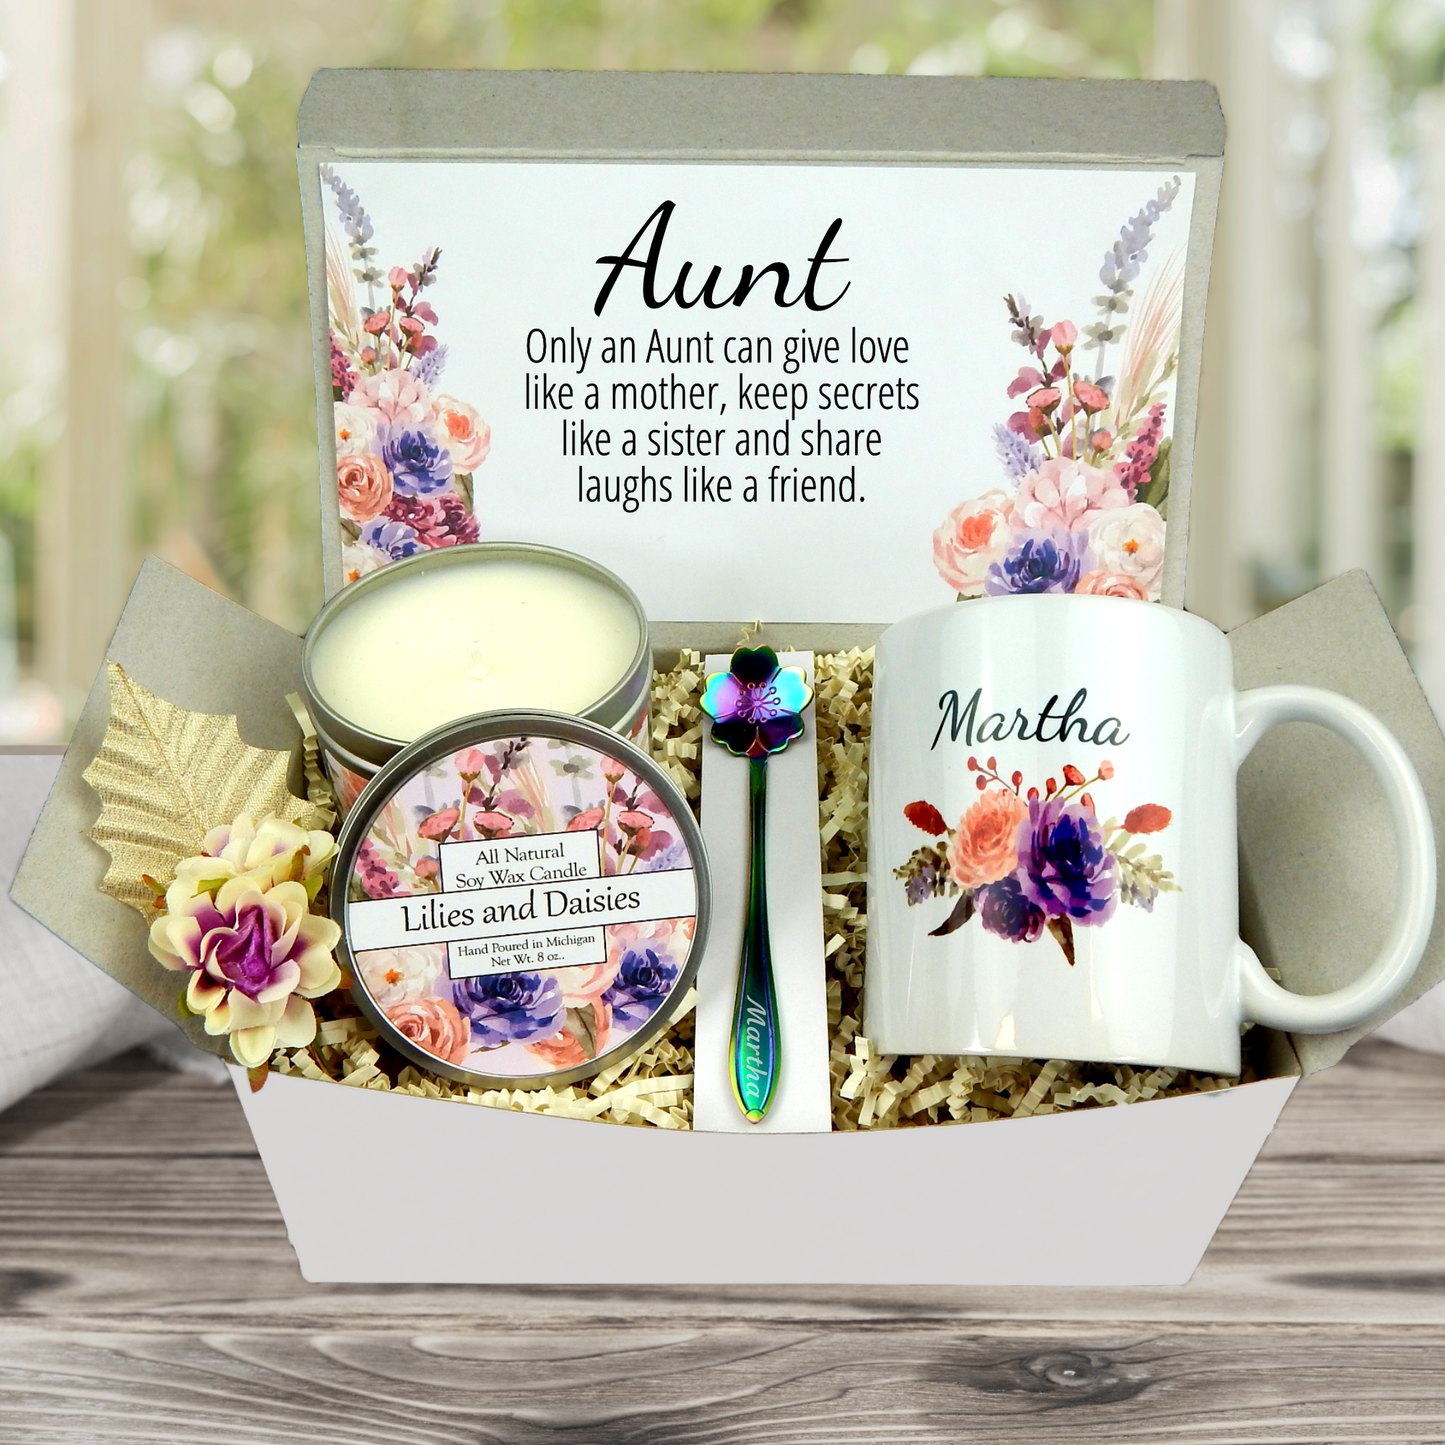 Heartfelt Gift for Aunt's Birthday or Any Occasion